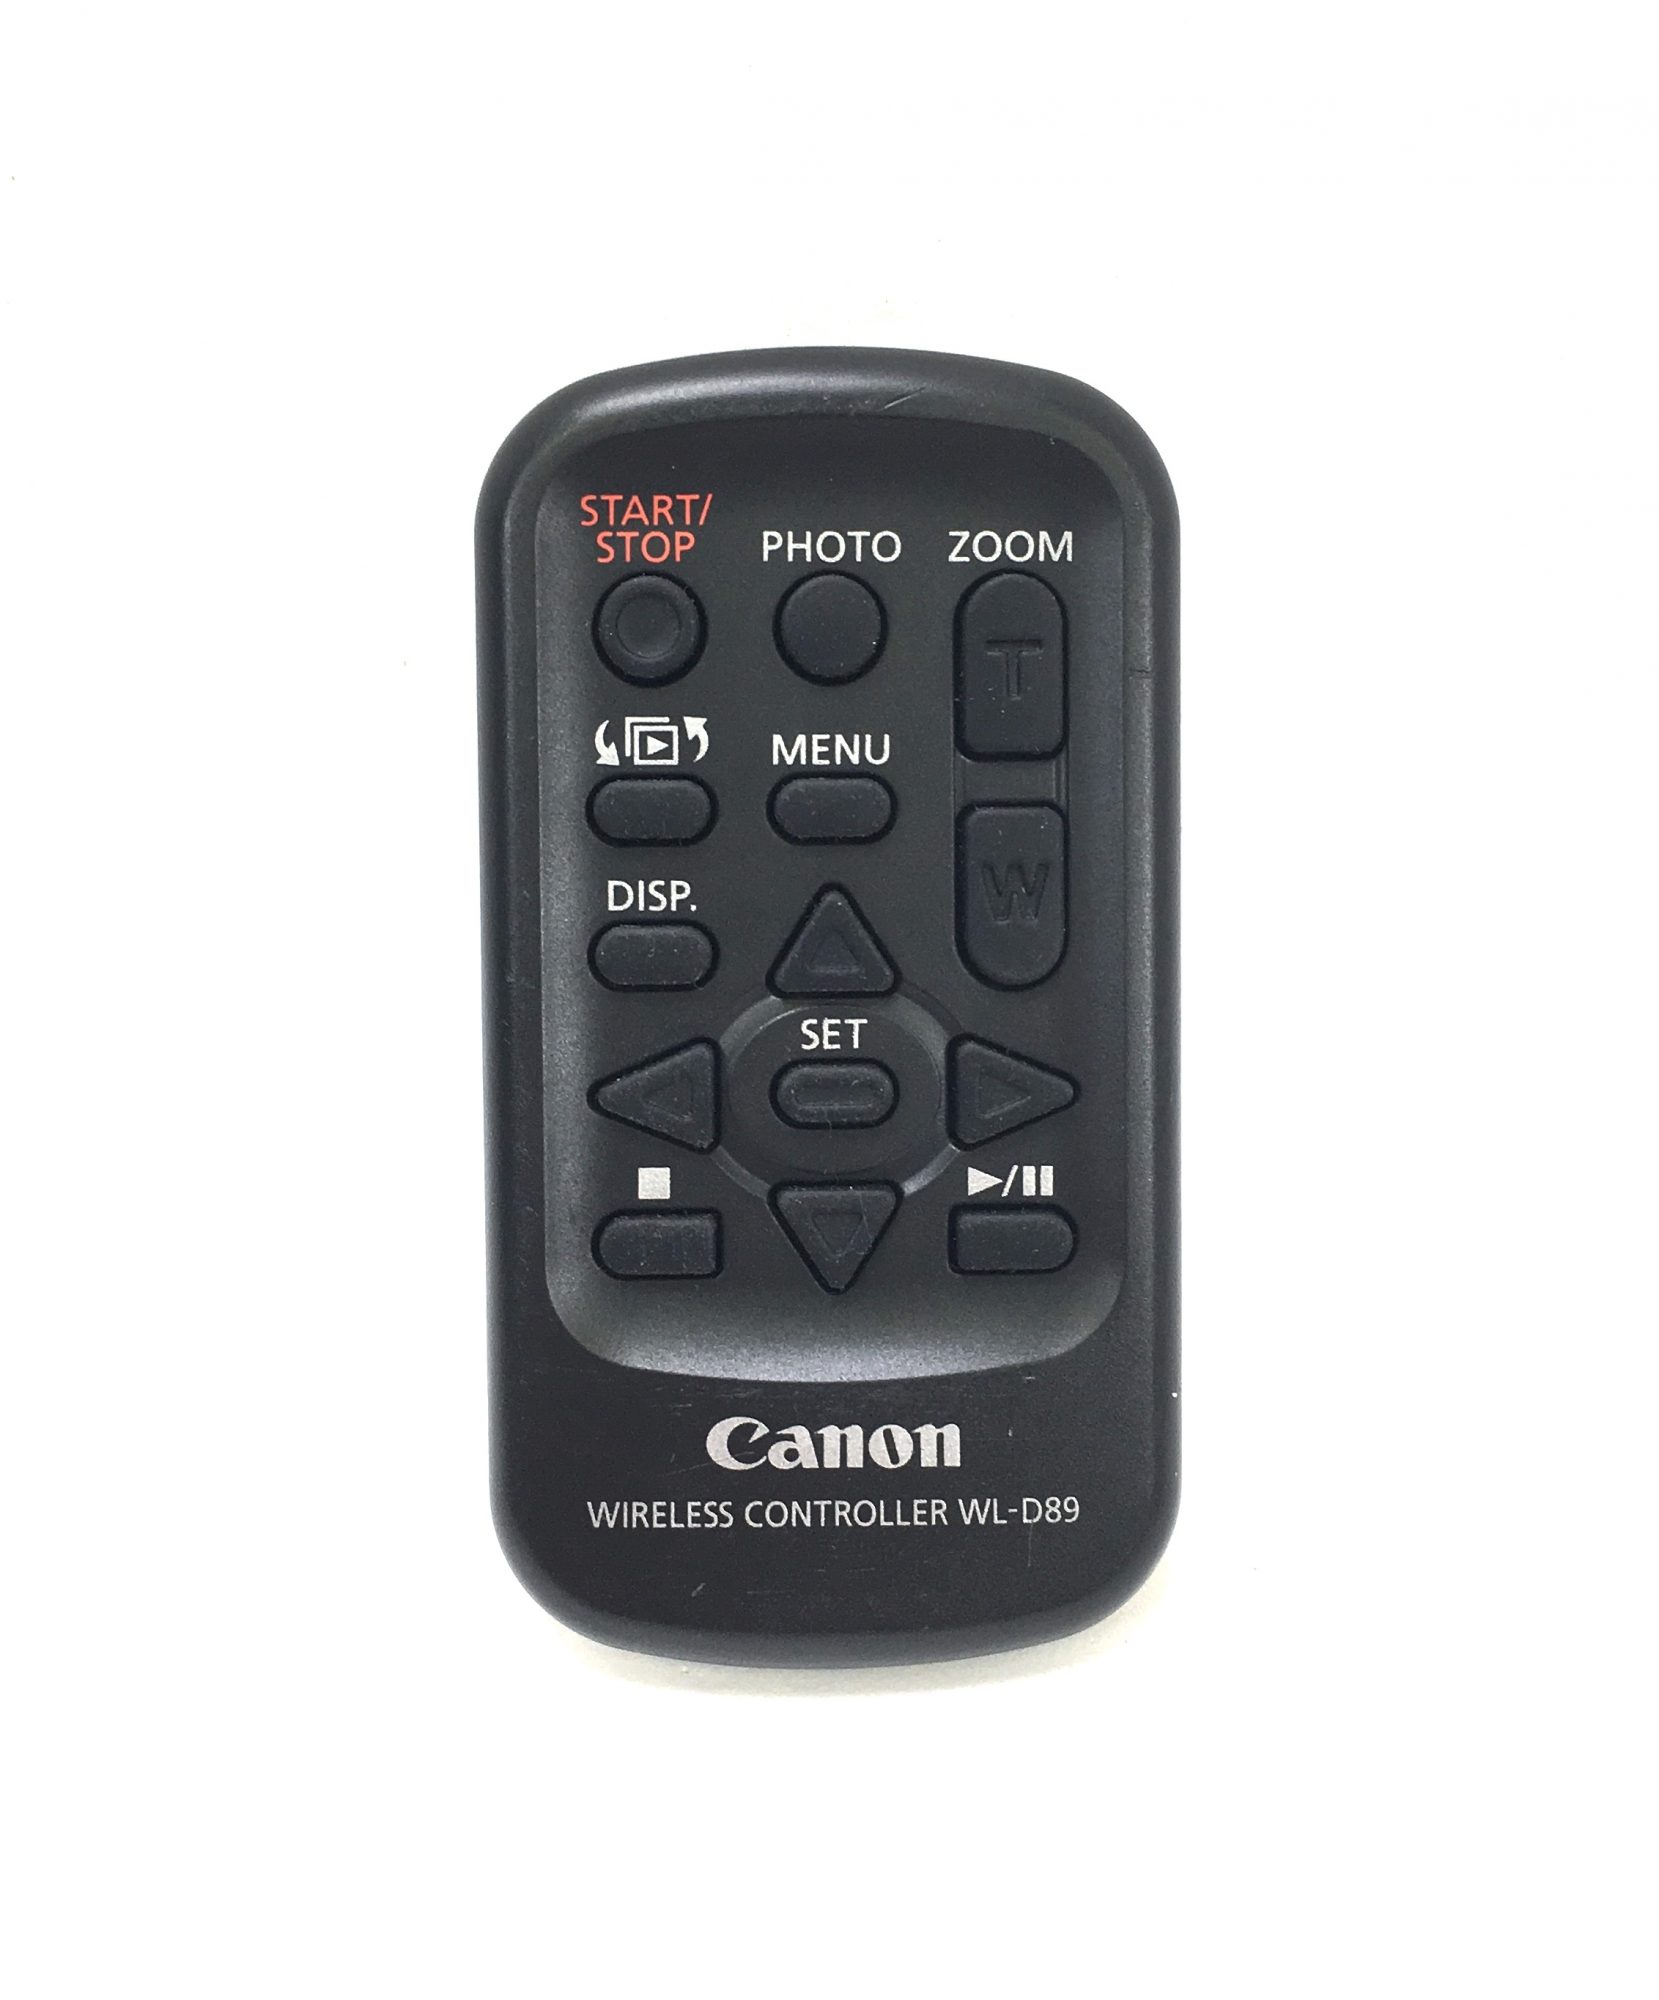 Original Wireless Remote Control for the Canon XA30 camcorder. It is a genuine Canon part, sourced directly from Canon USA. Brand new factory fresh. Free Shipping.